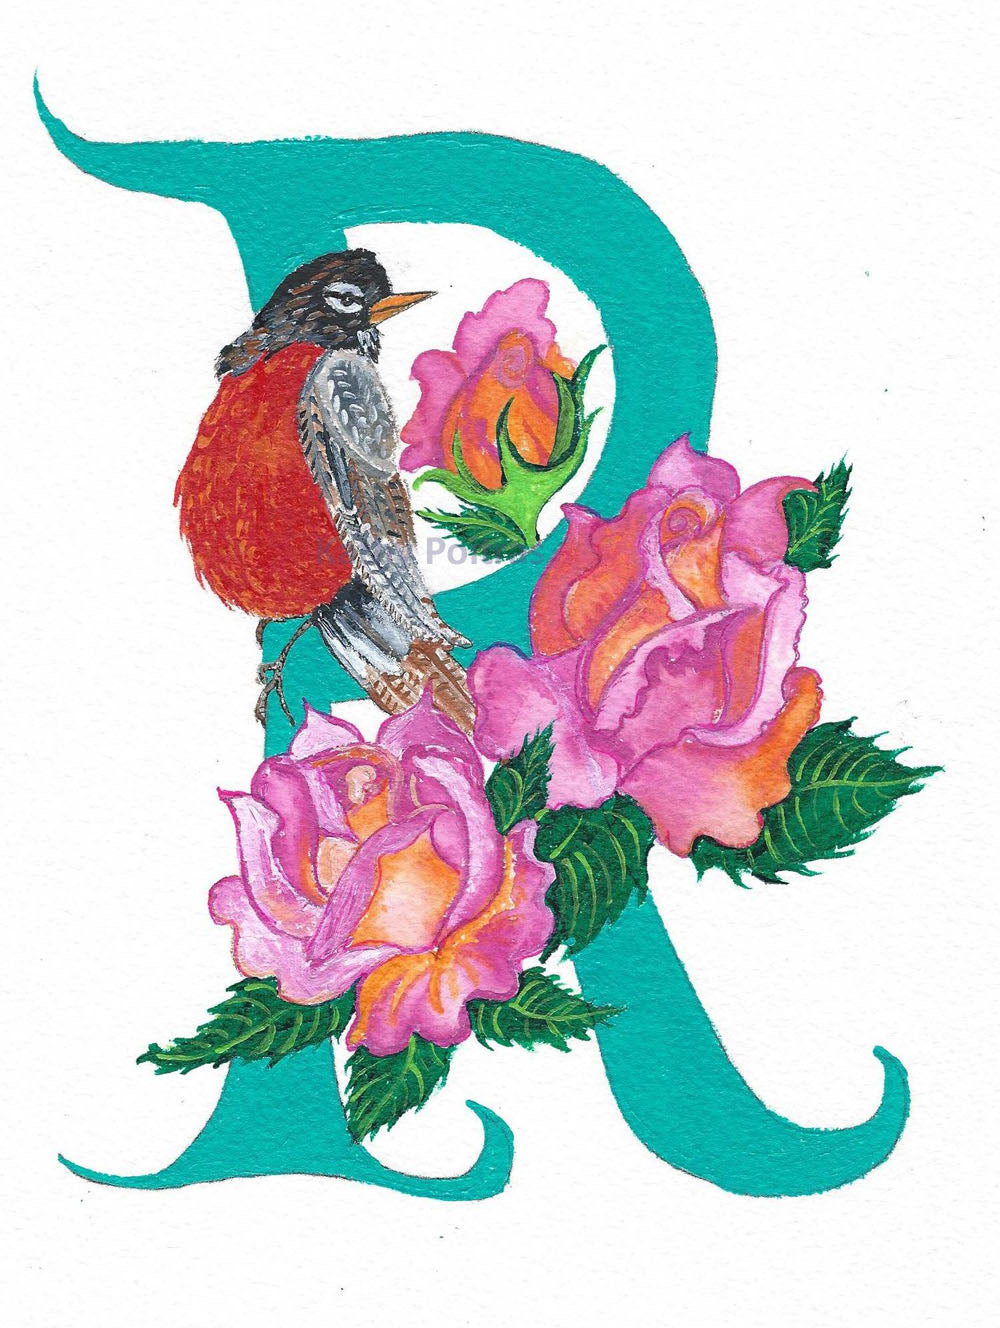 Letter R for Robin and Roses by artist Kathy Poitras